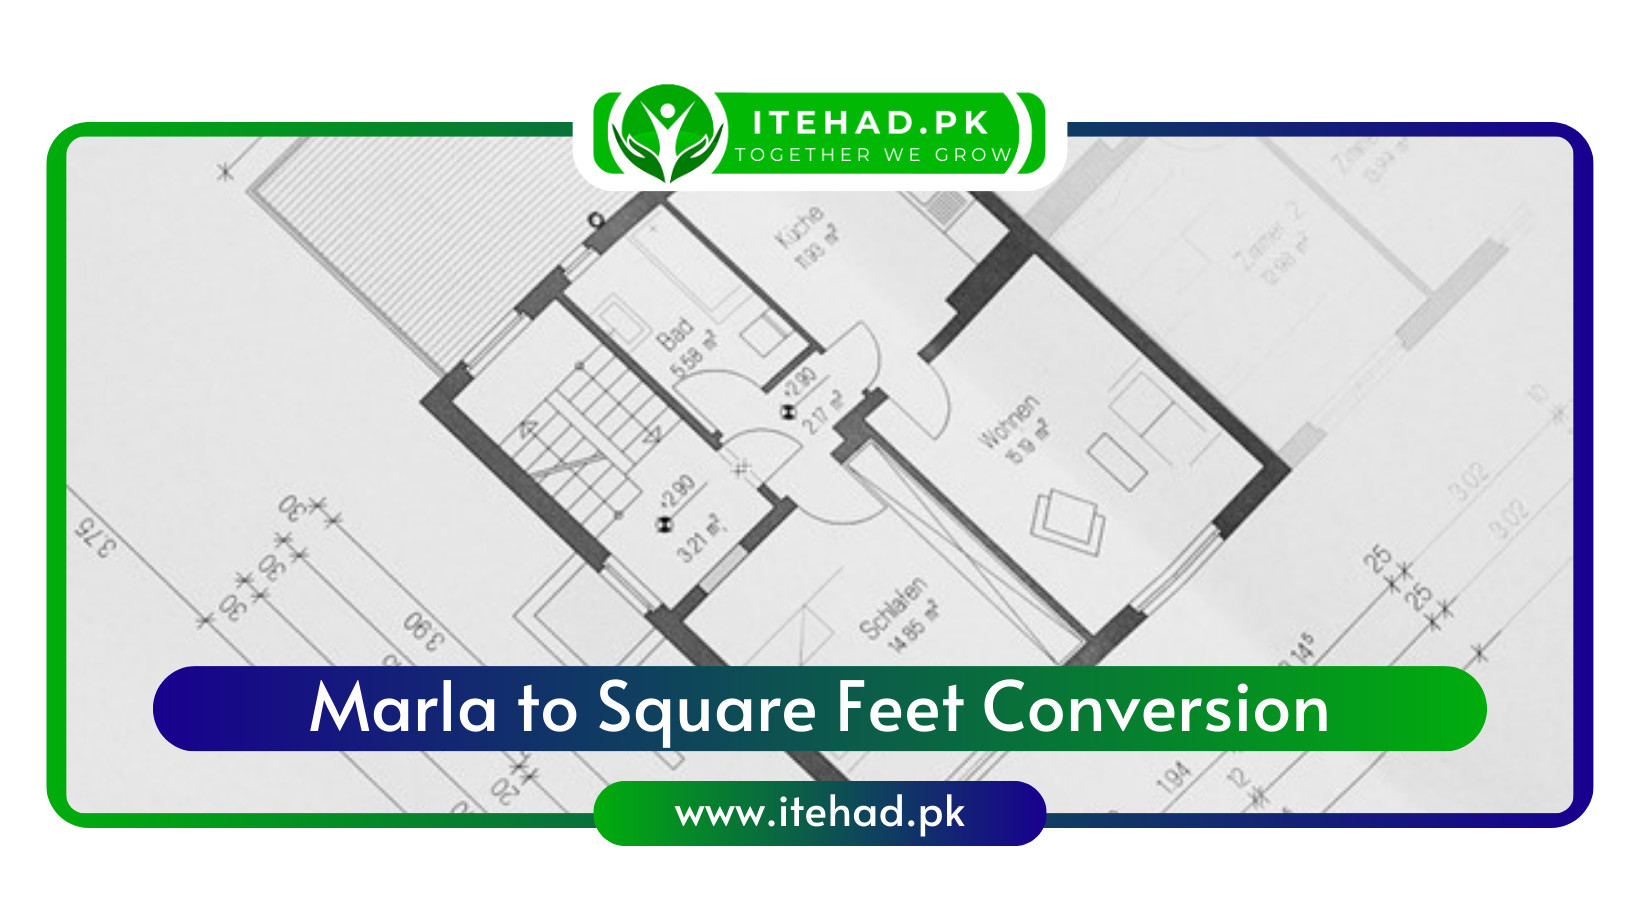 marla to square feet